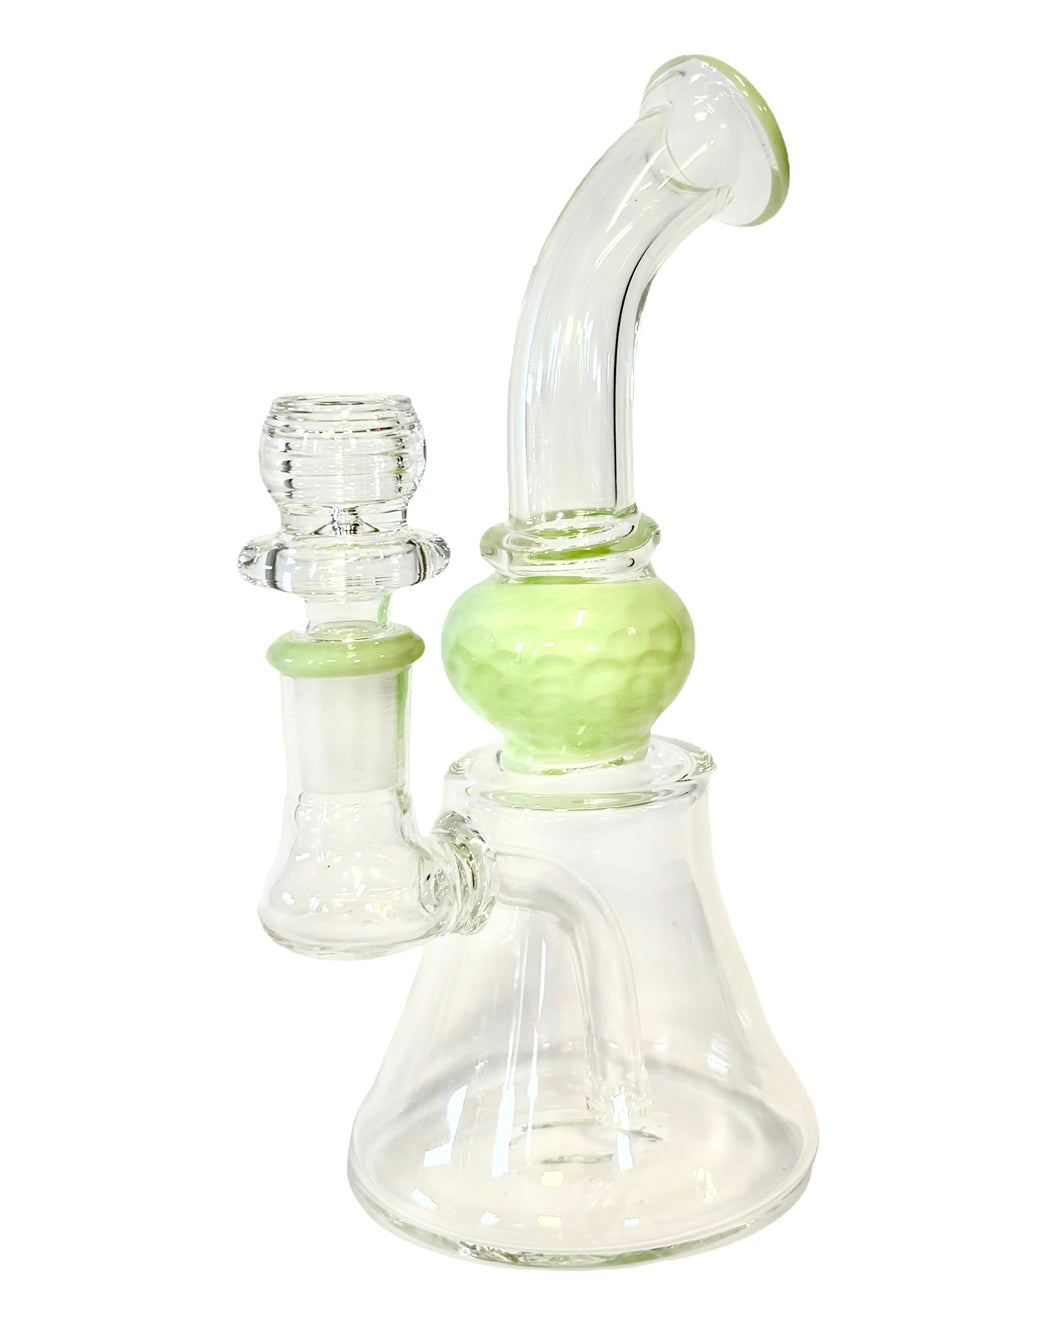 A Slyme Honeycomb Water Pipe.